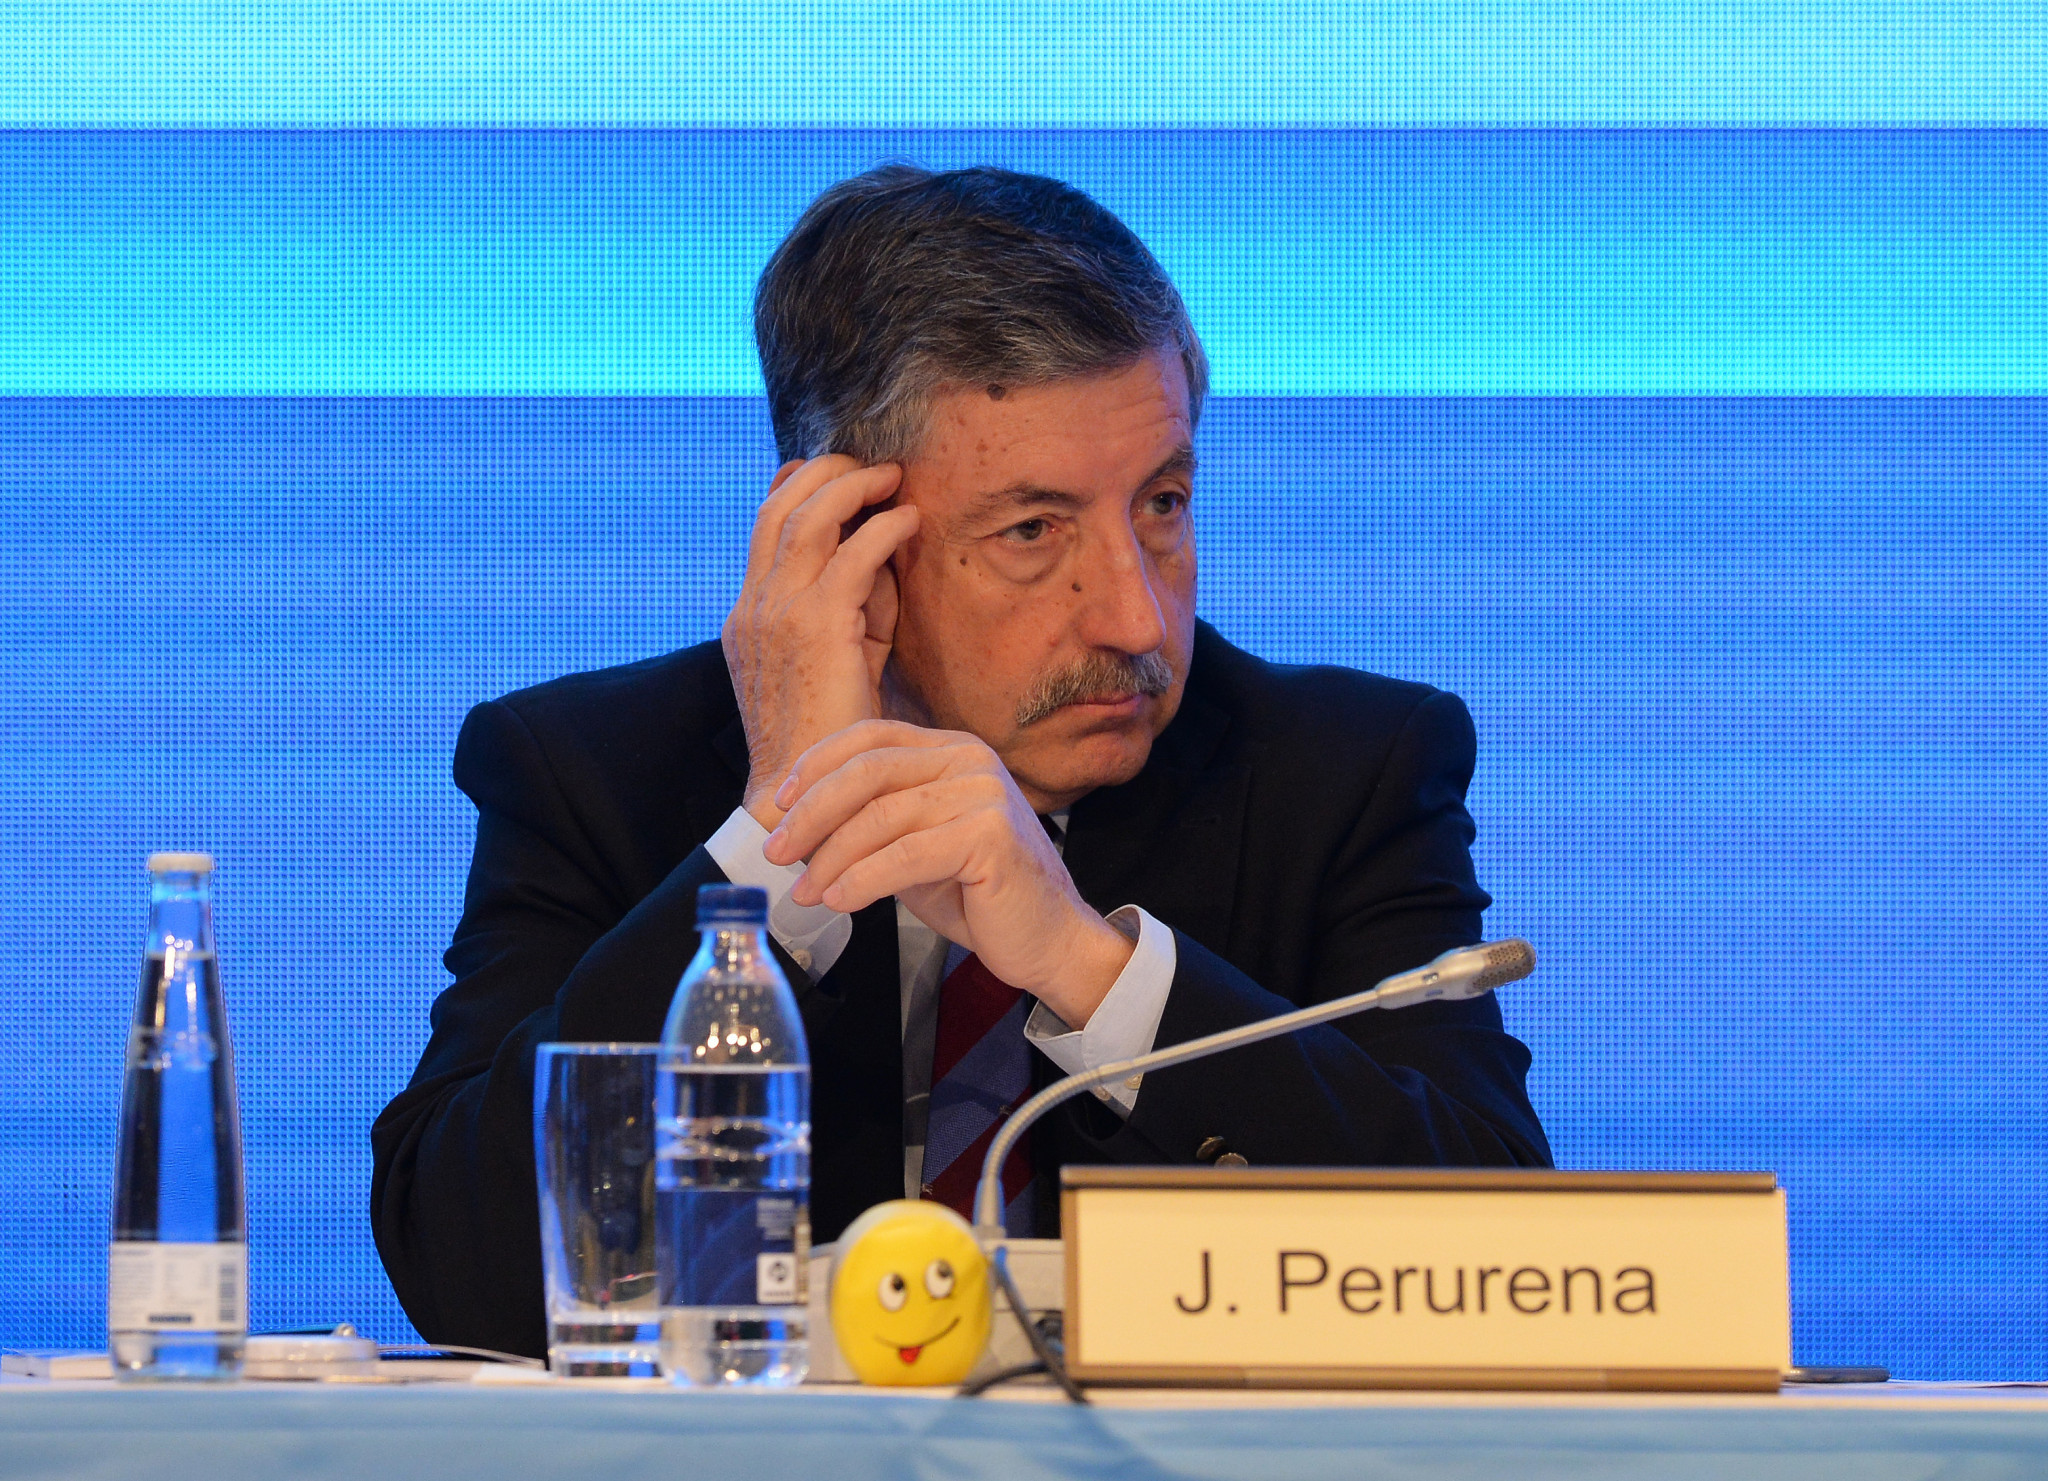 José Perurena is due to stand down as ICF President at the next Congress ©Getty Images